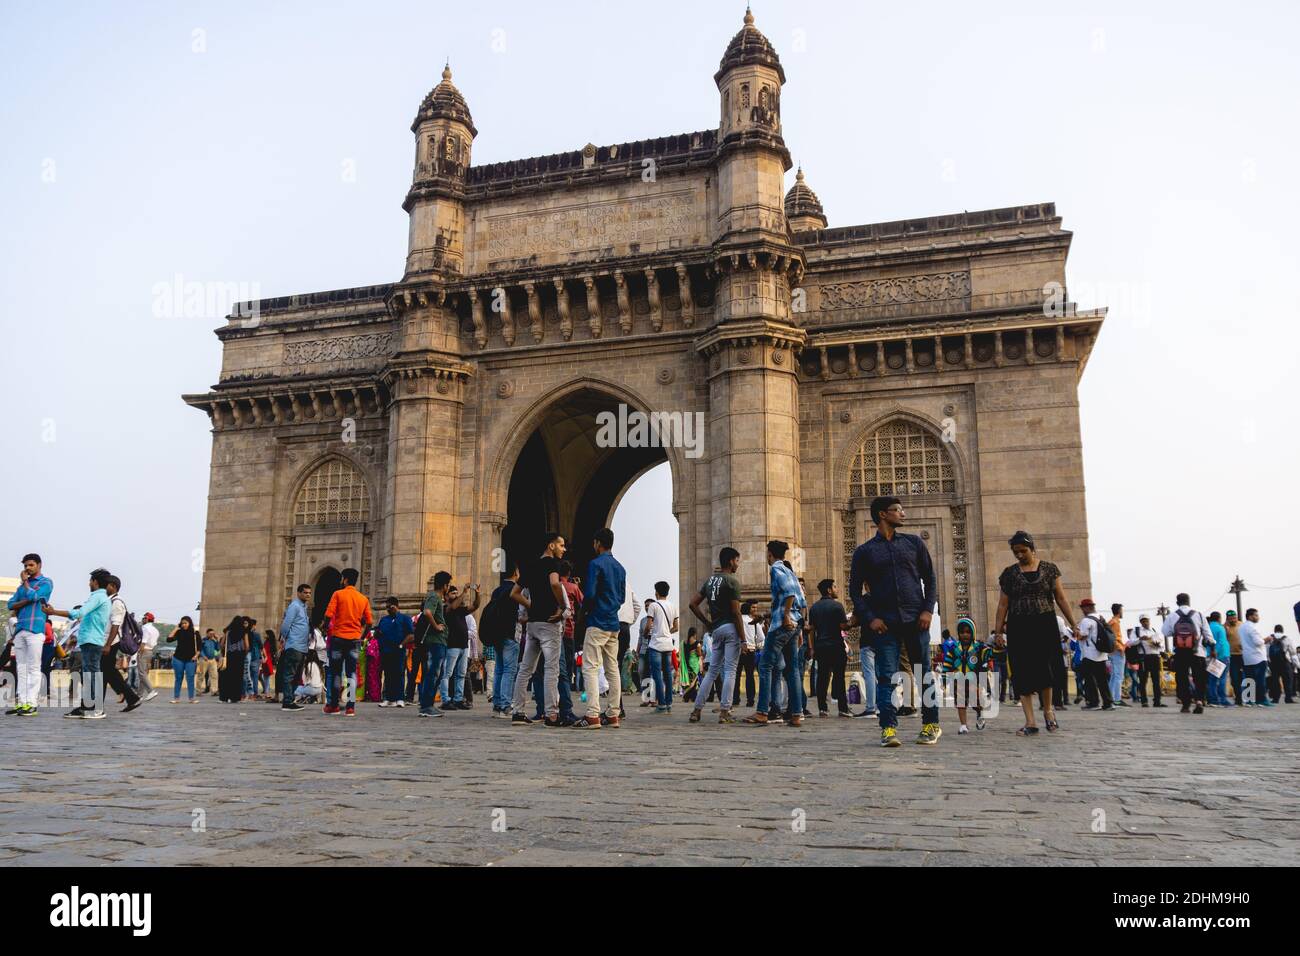 Gateway of India, a famous building at the port of Mumbai, India. people flocking in front of the monument in the weekend for a visit. Stock Photo